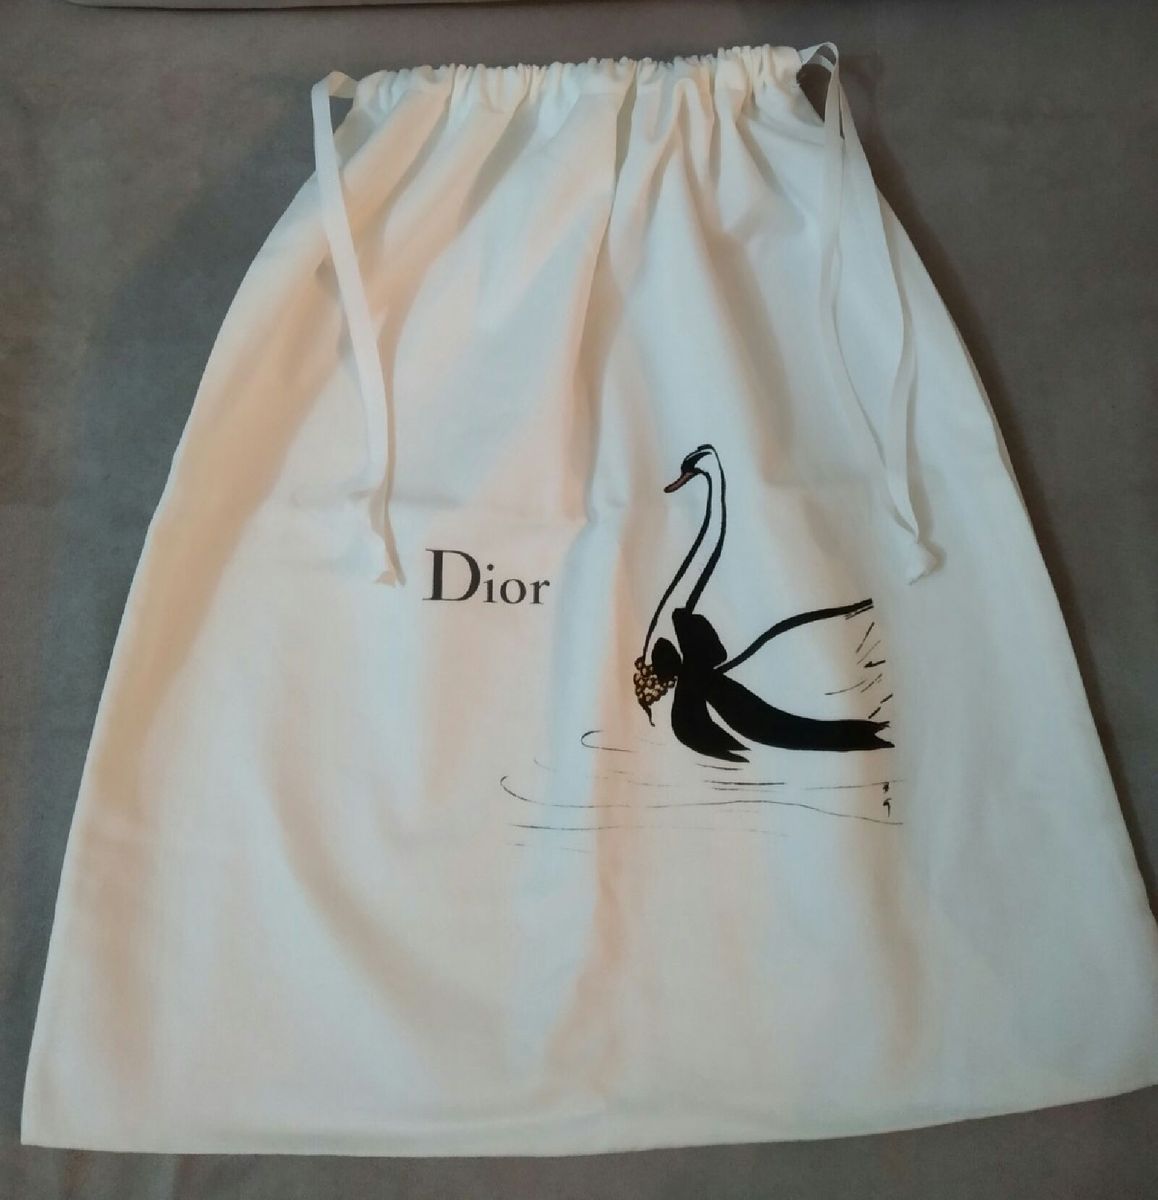 dior dust bag with swan, OFF 74%,Cheap 